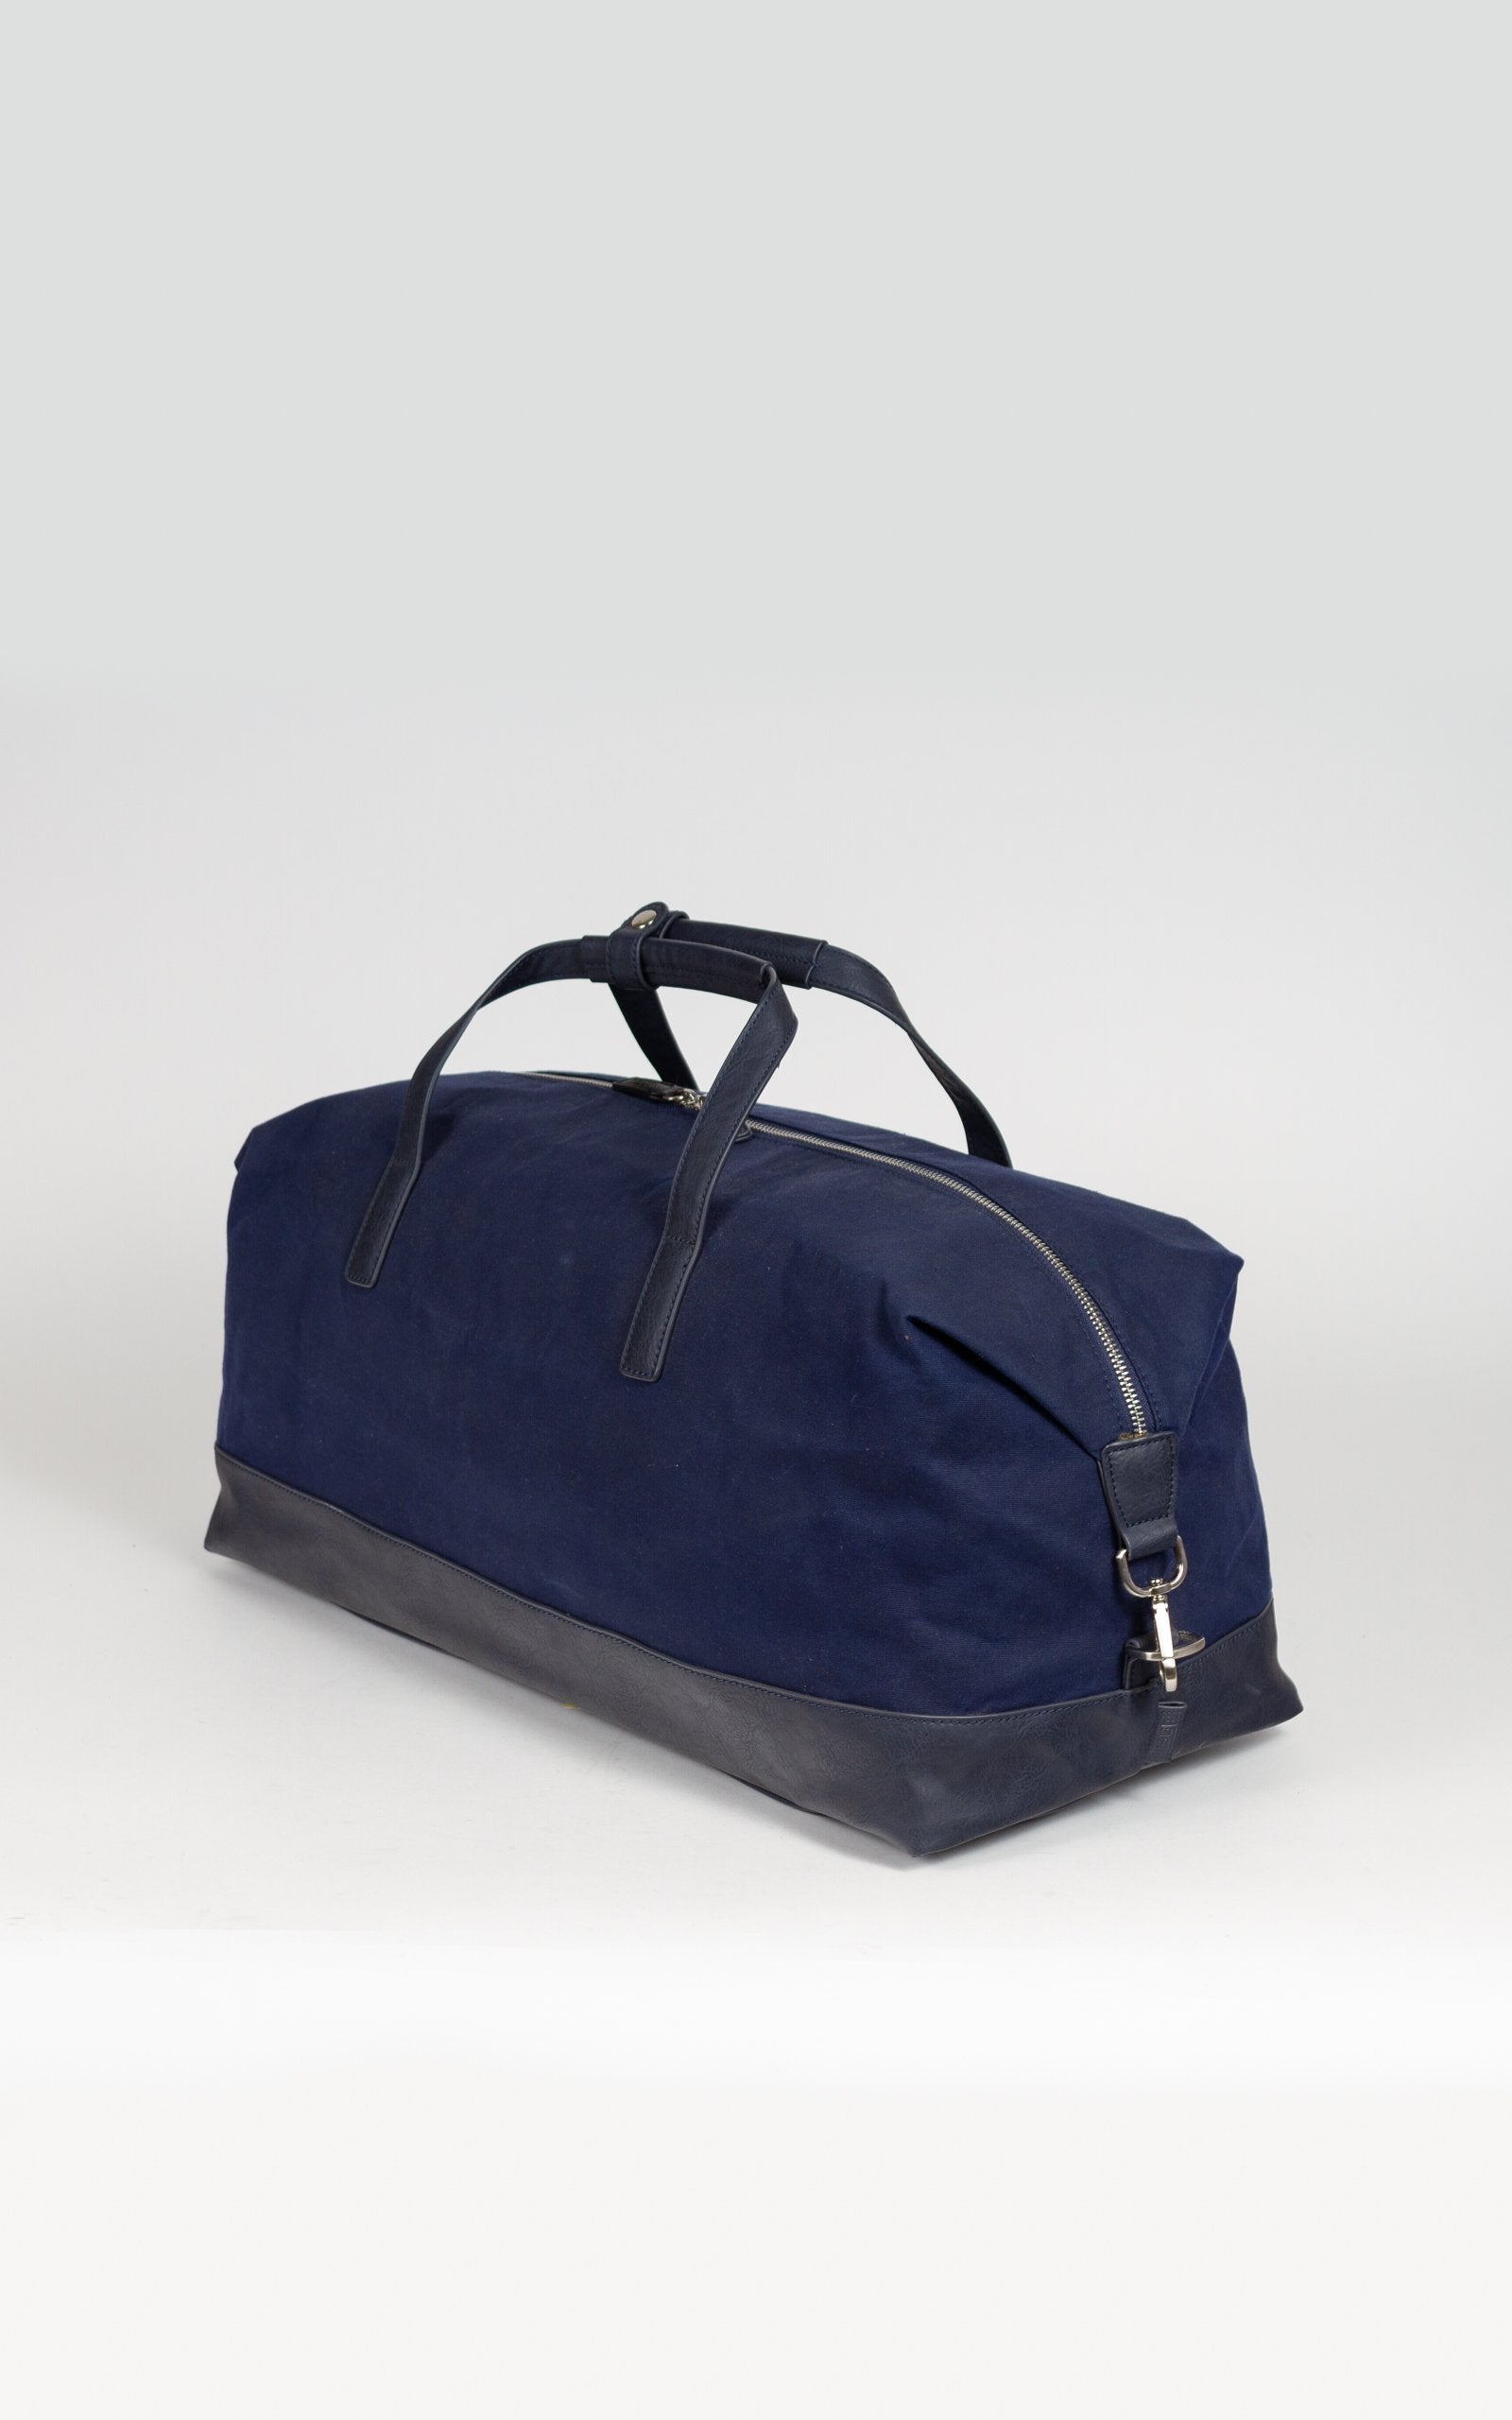 BEON.COM.AU The Jost Goteborg Travel Bag is a vegan leather and canvas bag.  Made of premium cotton, linen and raffia Large spacious compartment with internal organisation Outer compartment with zipper Shoulder strap adjustable and removable 25cm x 52cm x 24cm 25L Volume  Bags Jost at BEON.COM.AU